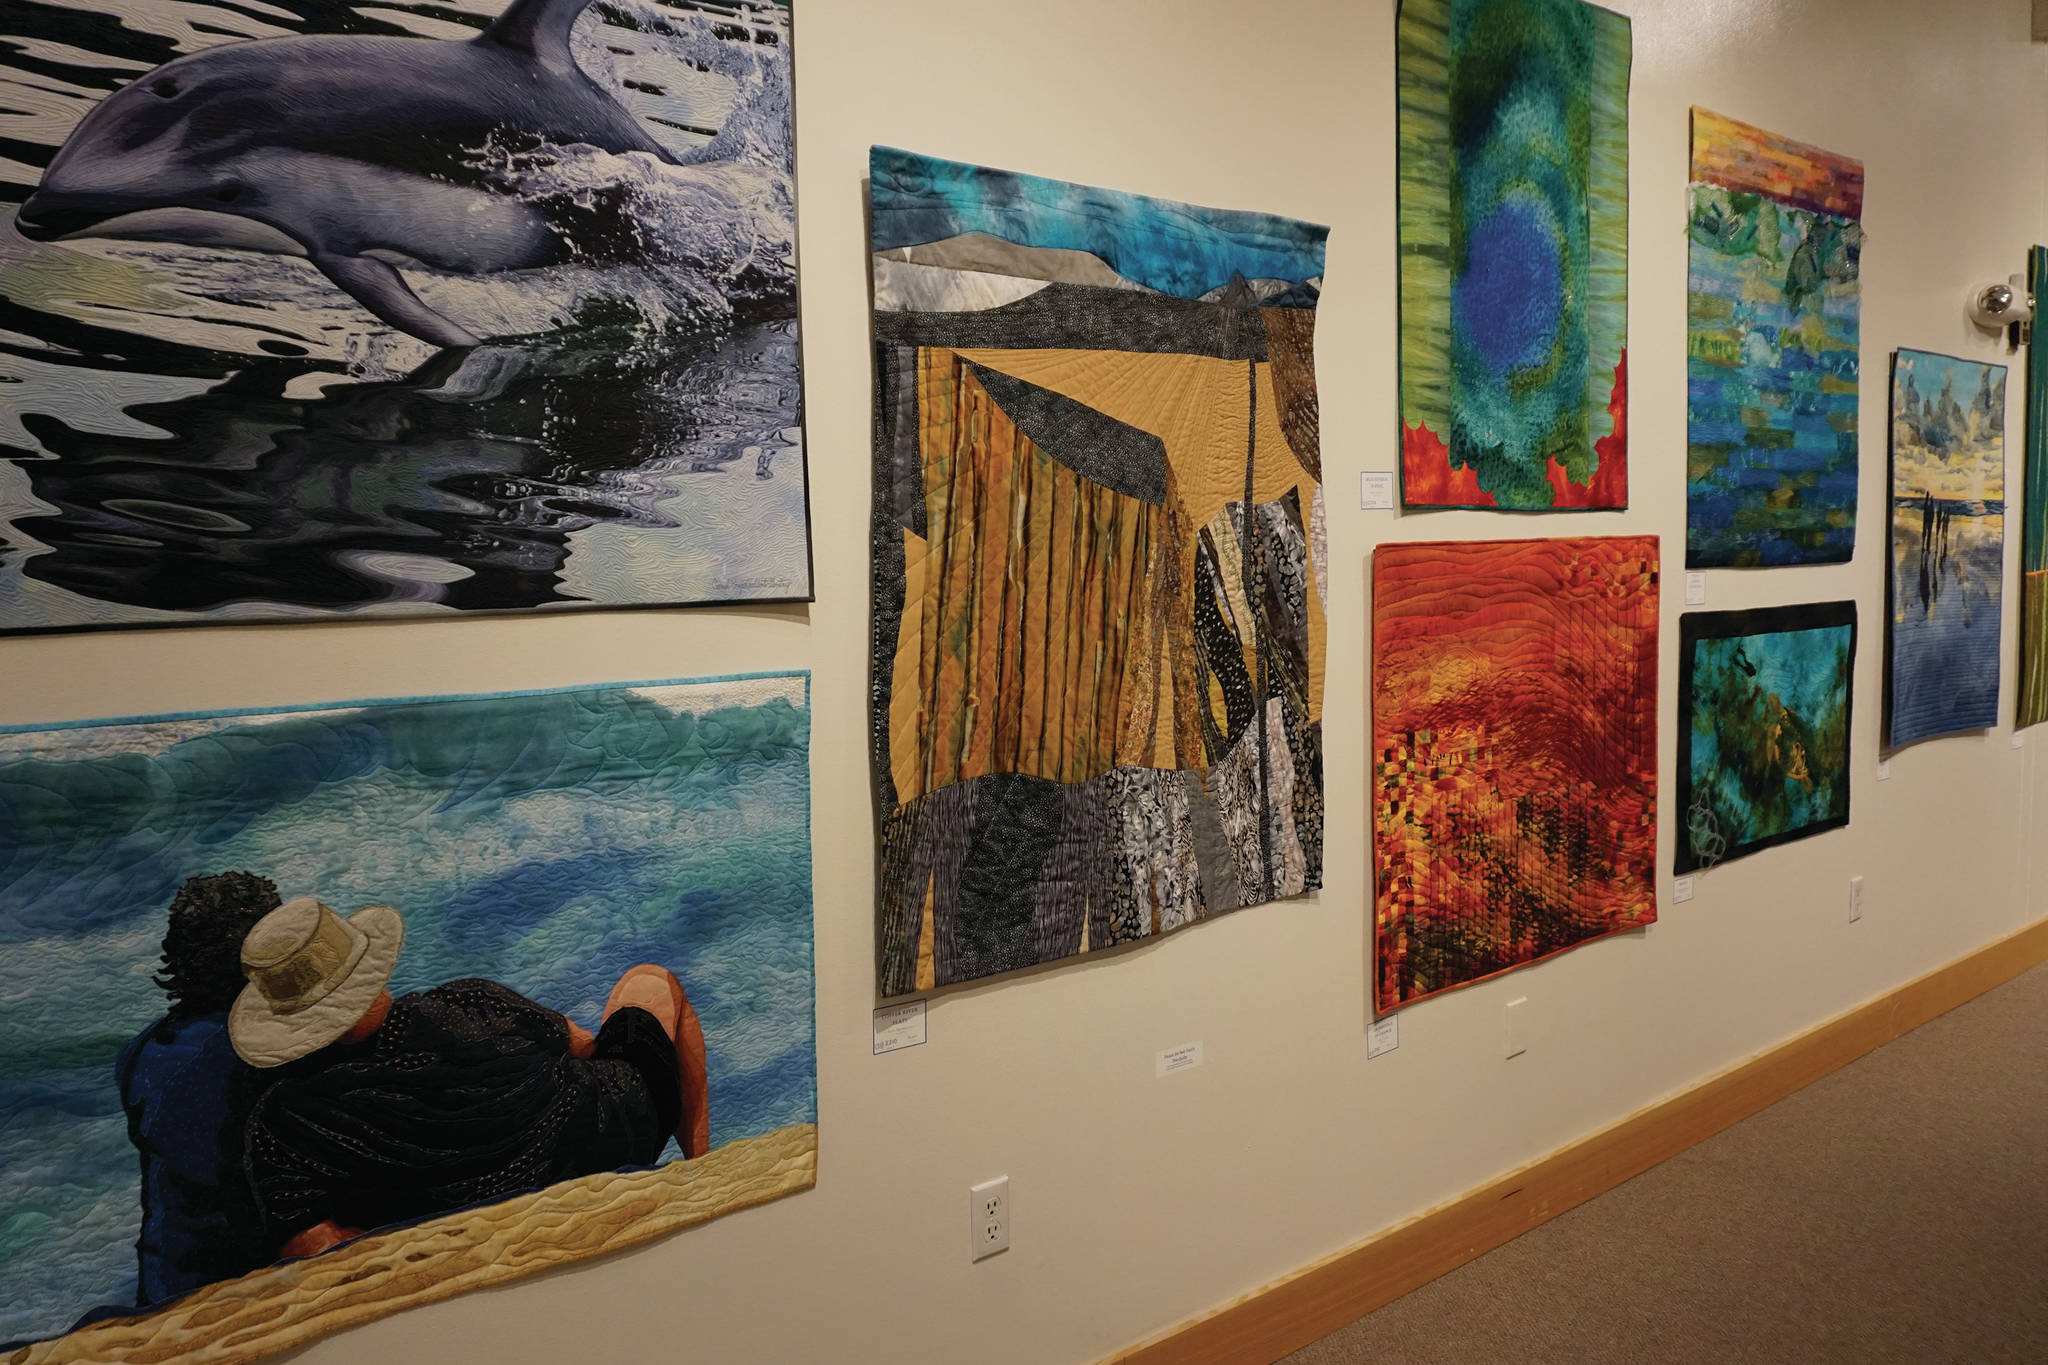 Some of the 45 art quilts featured in "Shifting Tides: Cloth in Convergence," on exhibit from Oct. 9 to Nov. 28, 2020, at the Pratt Museum in Homer, Alaska. (Photo by Michael Armstrong/Homer News)